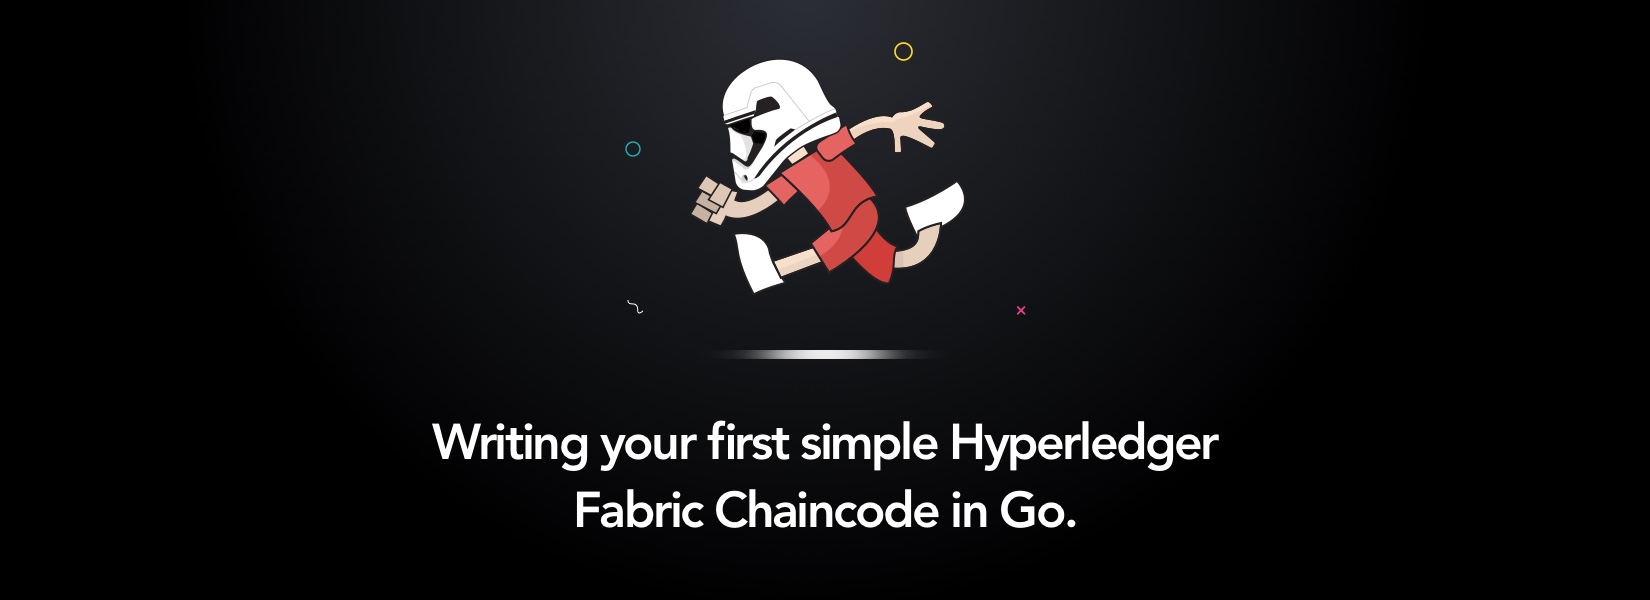 Writing your first simple Hyperledger Fabric Chaincode in Go